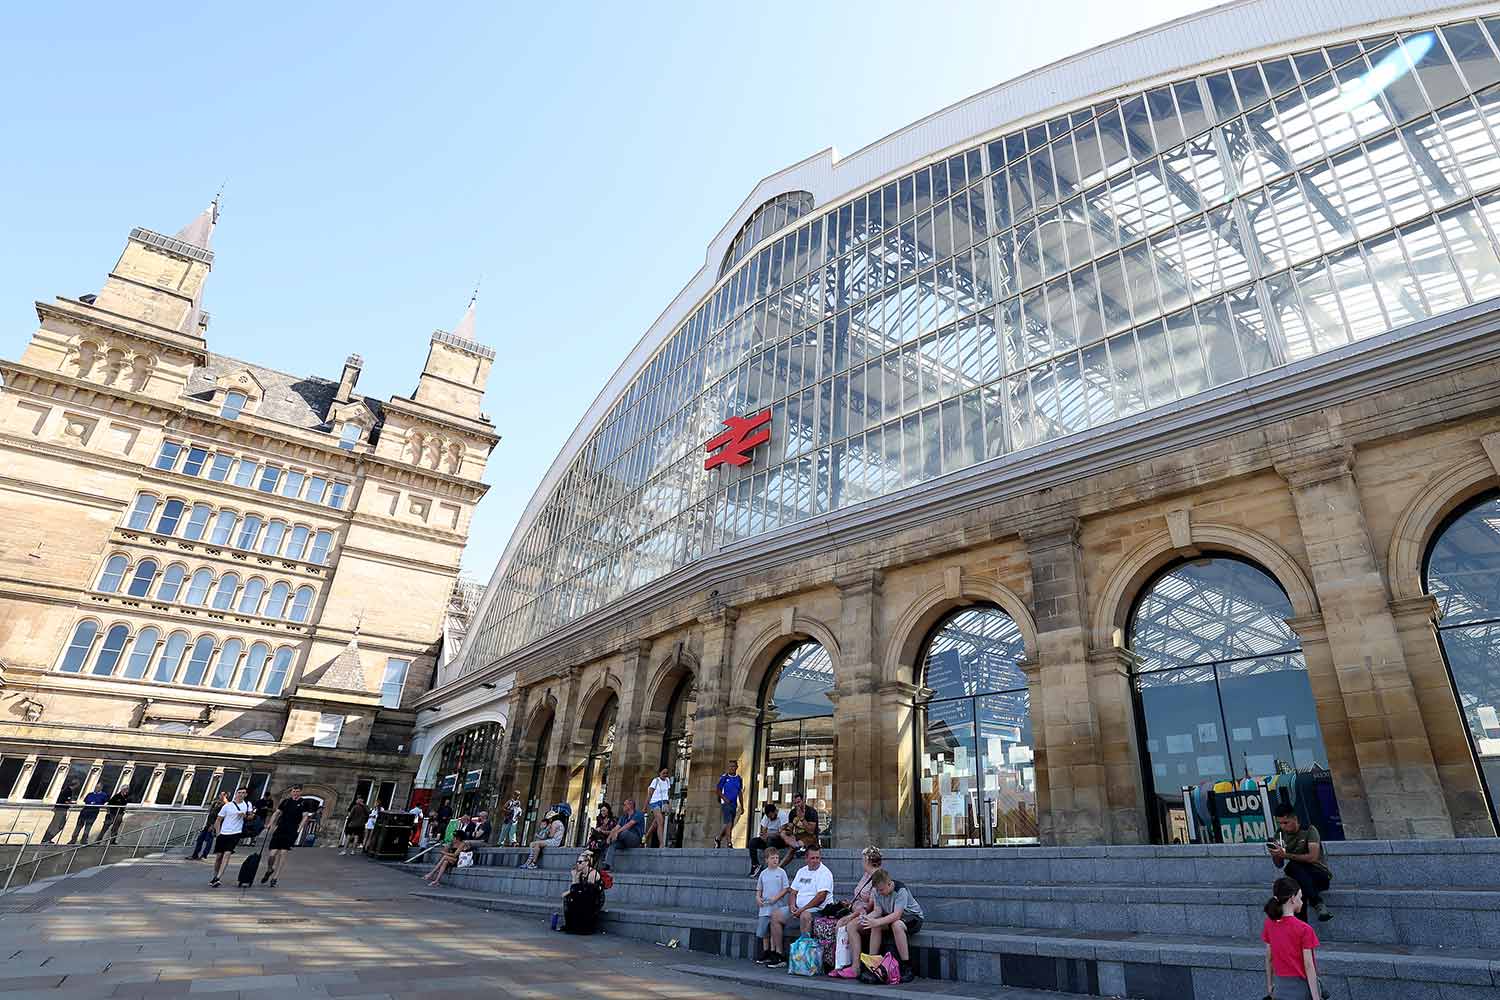 The exterior of Liverpool Lime Street railway station